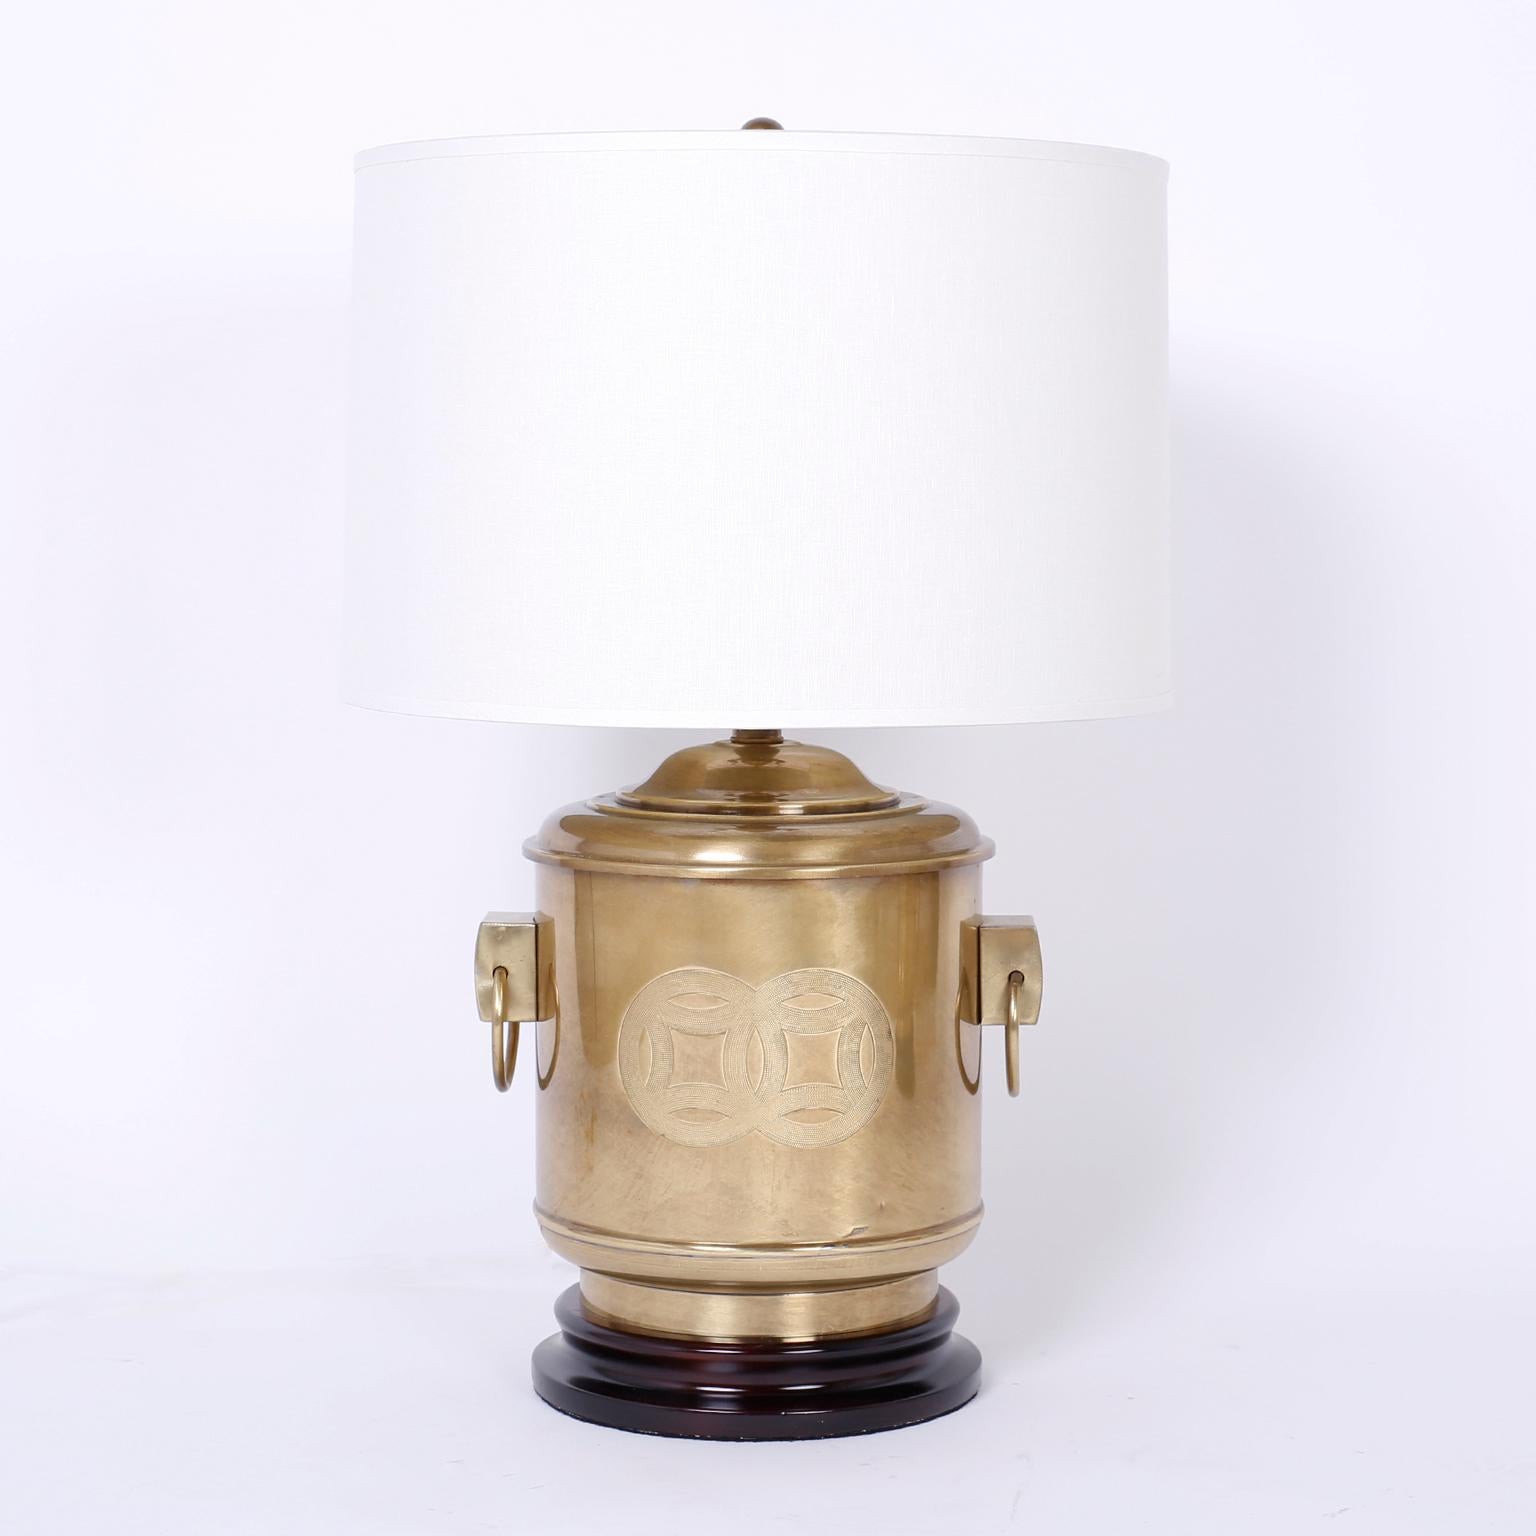 Chic pair of midcentury Chinese style brass table lamps with a canister form having overlapping circular good luck symbols, ring handles and turned wood bases.